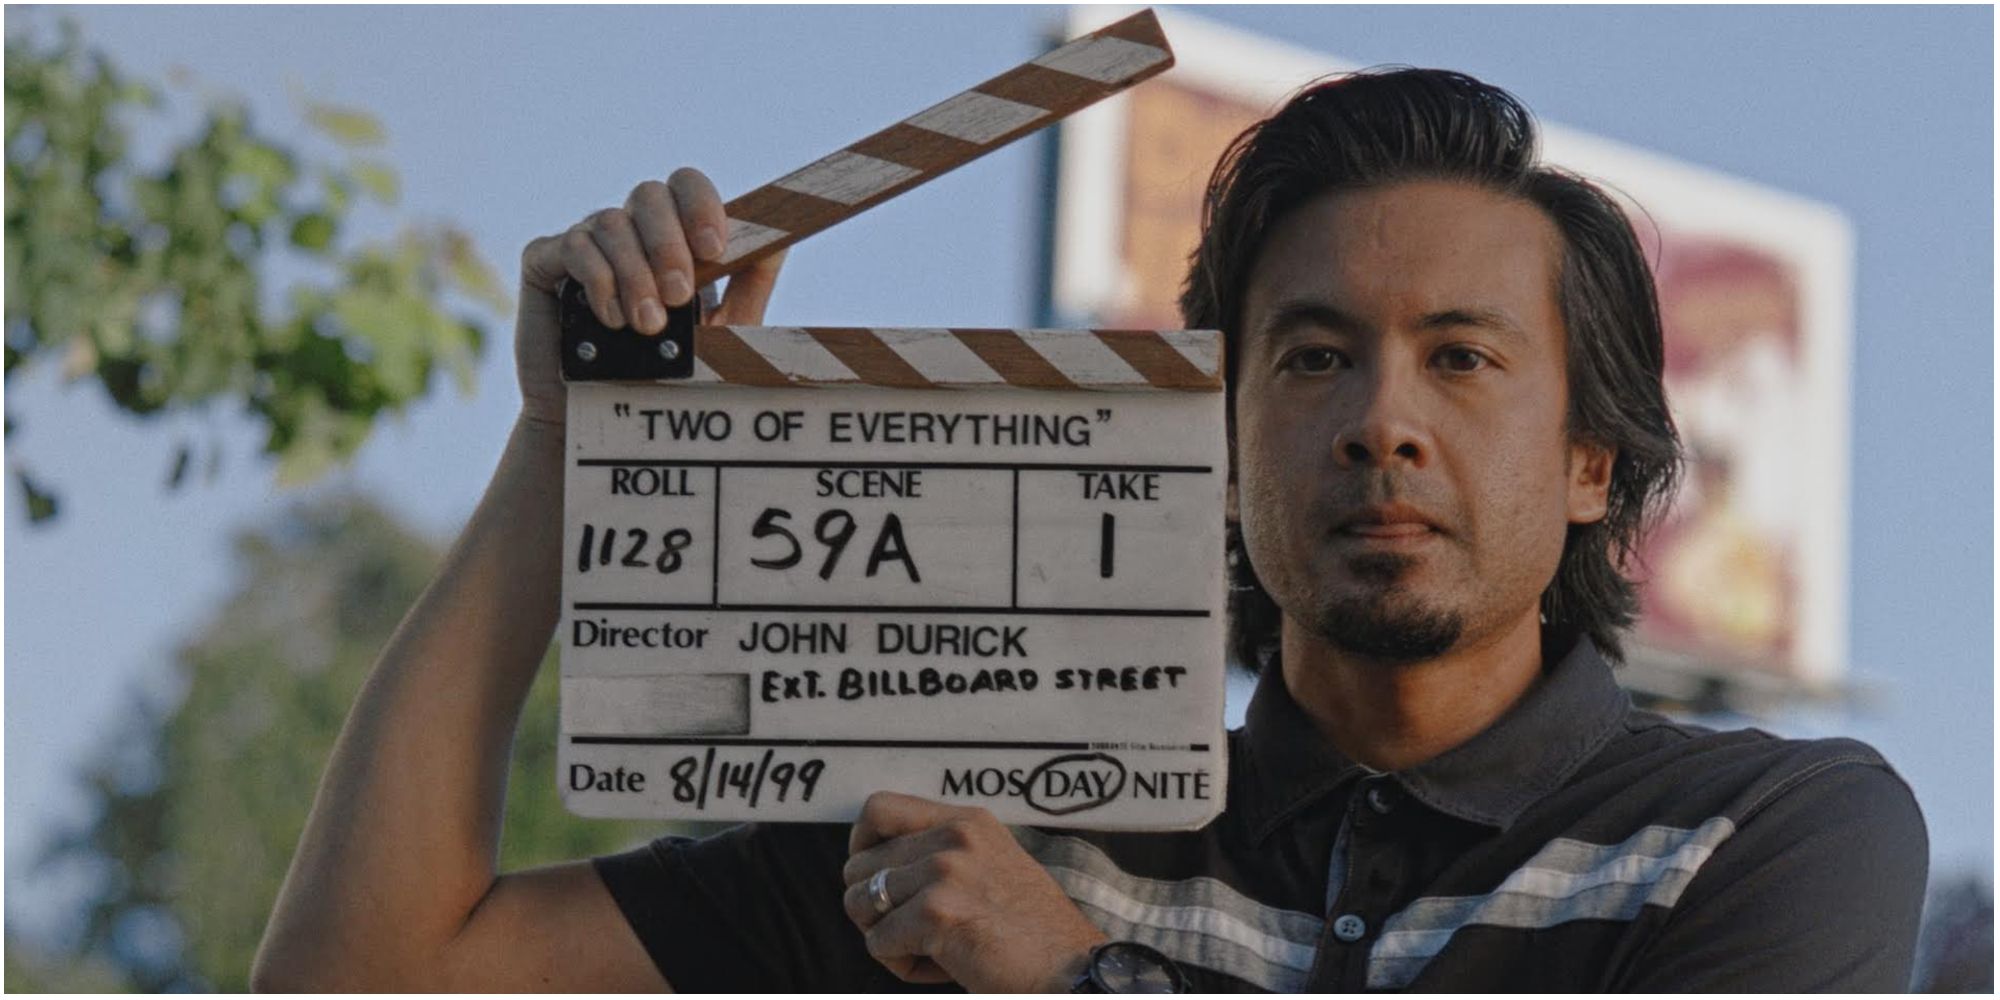 A member of crew holding a clapper board